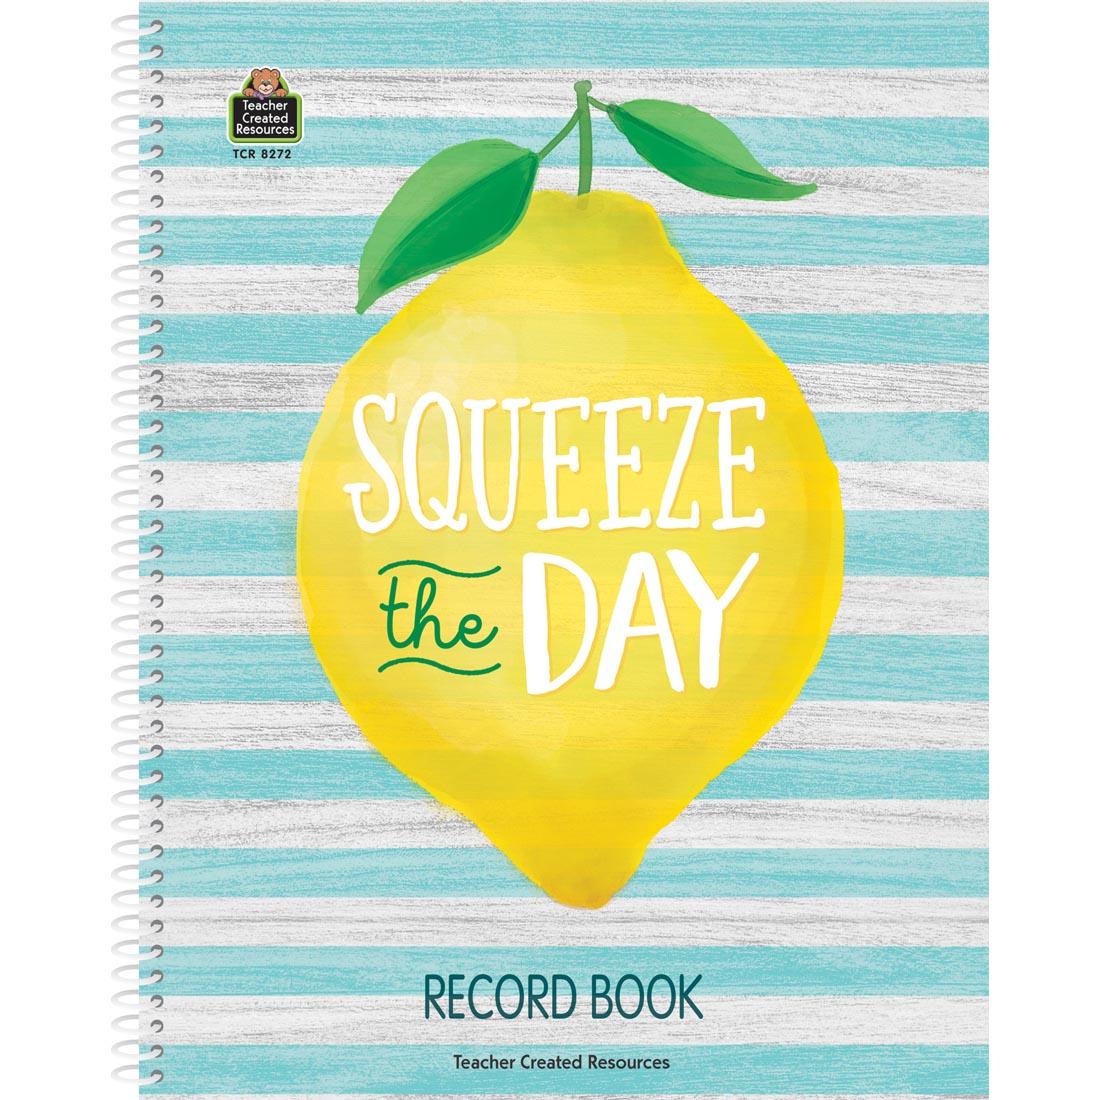 Record Book from the Lemon Zest collection by Teacher Created Resources reads Squeeze the Day